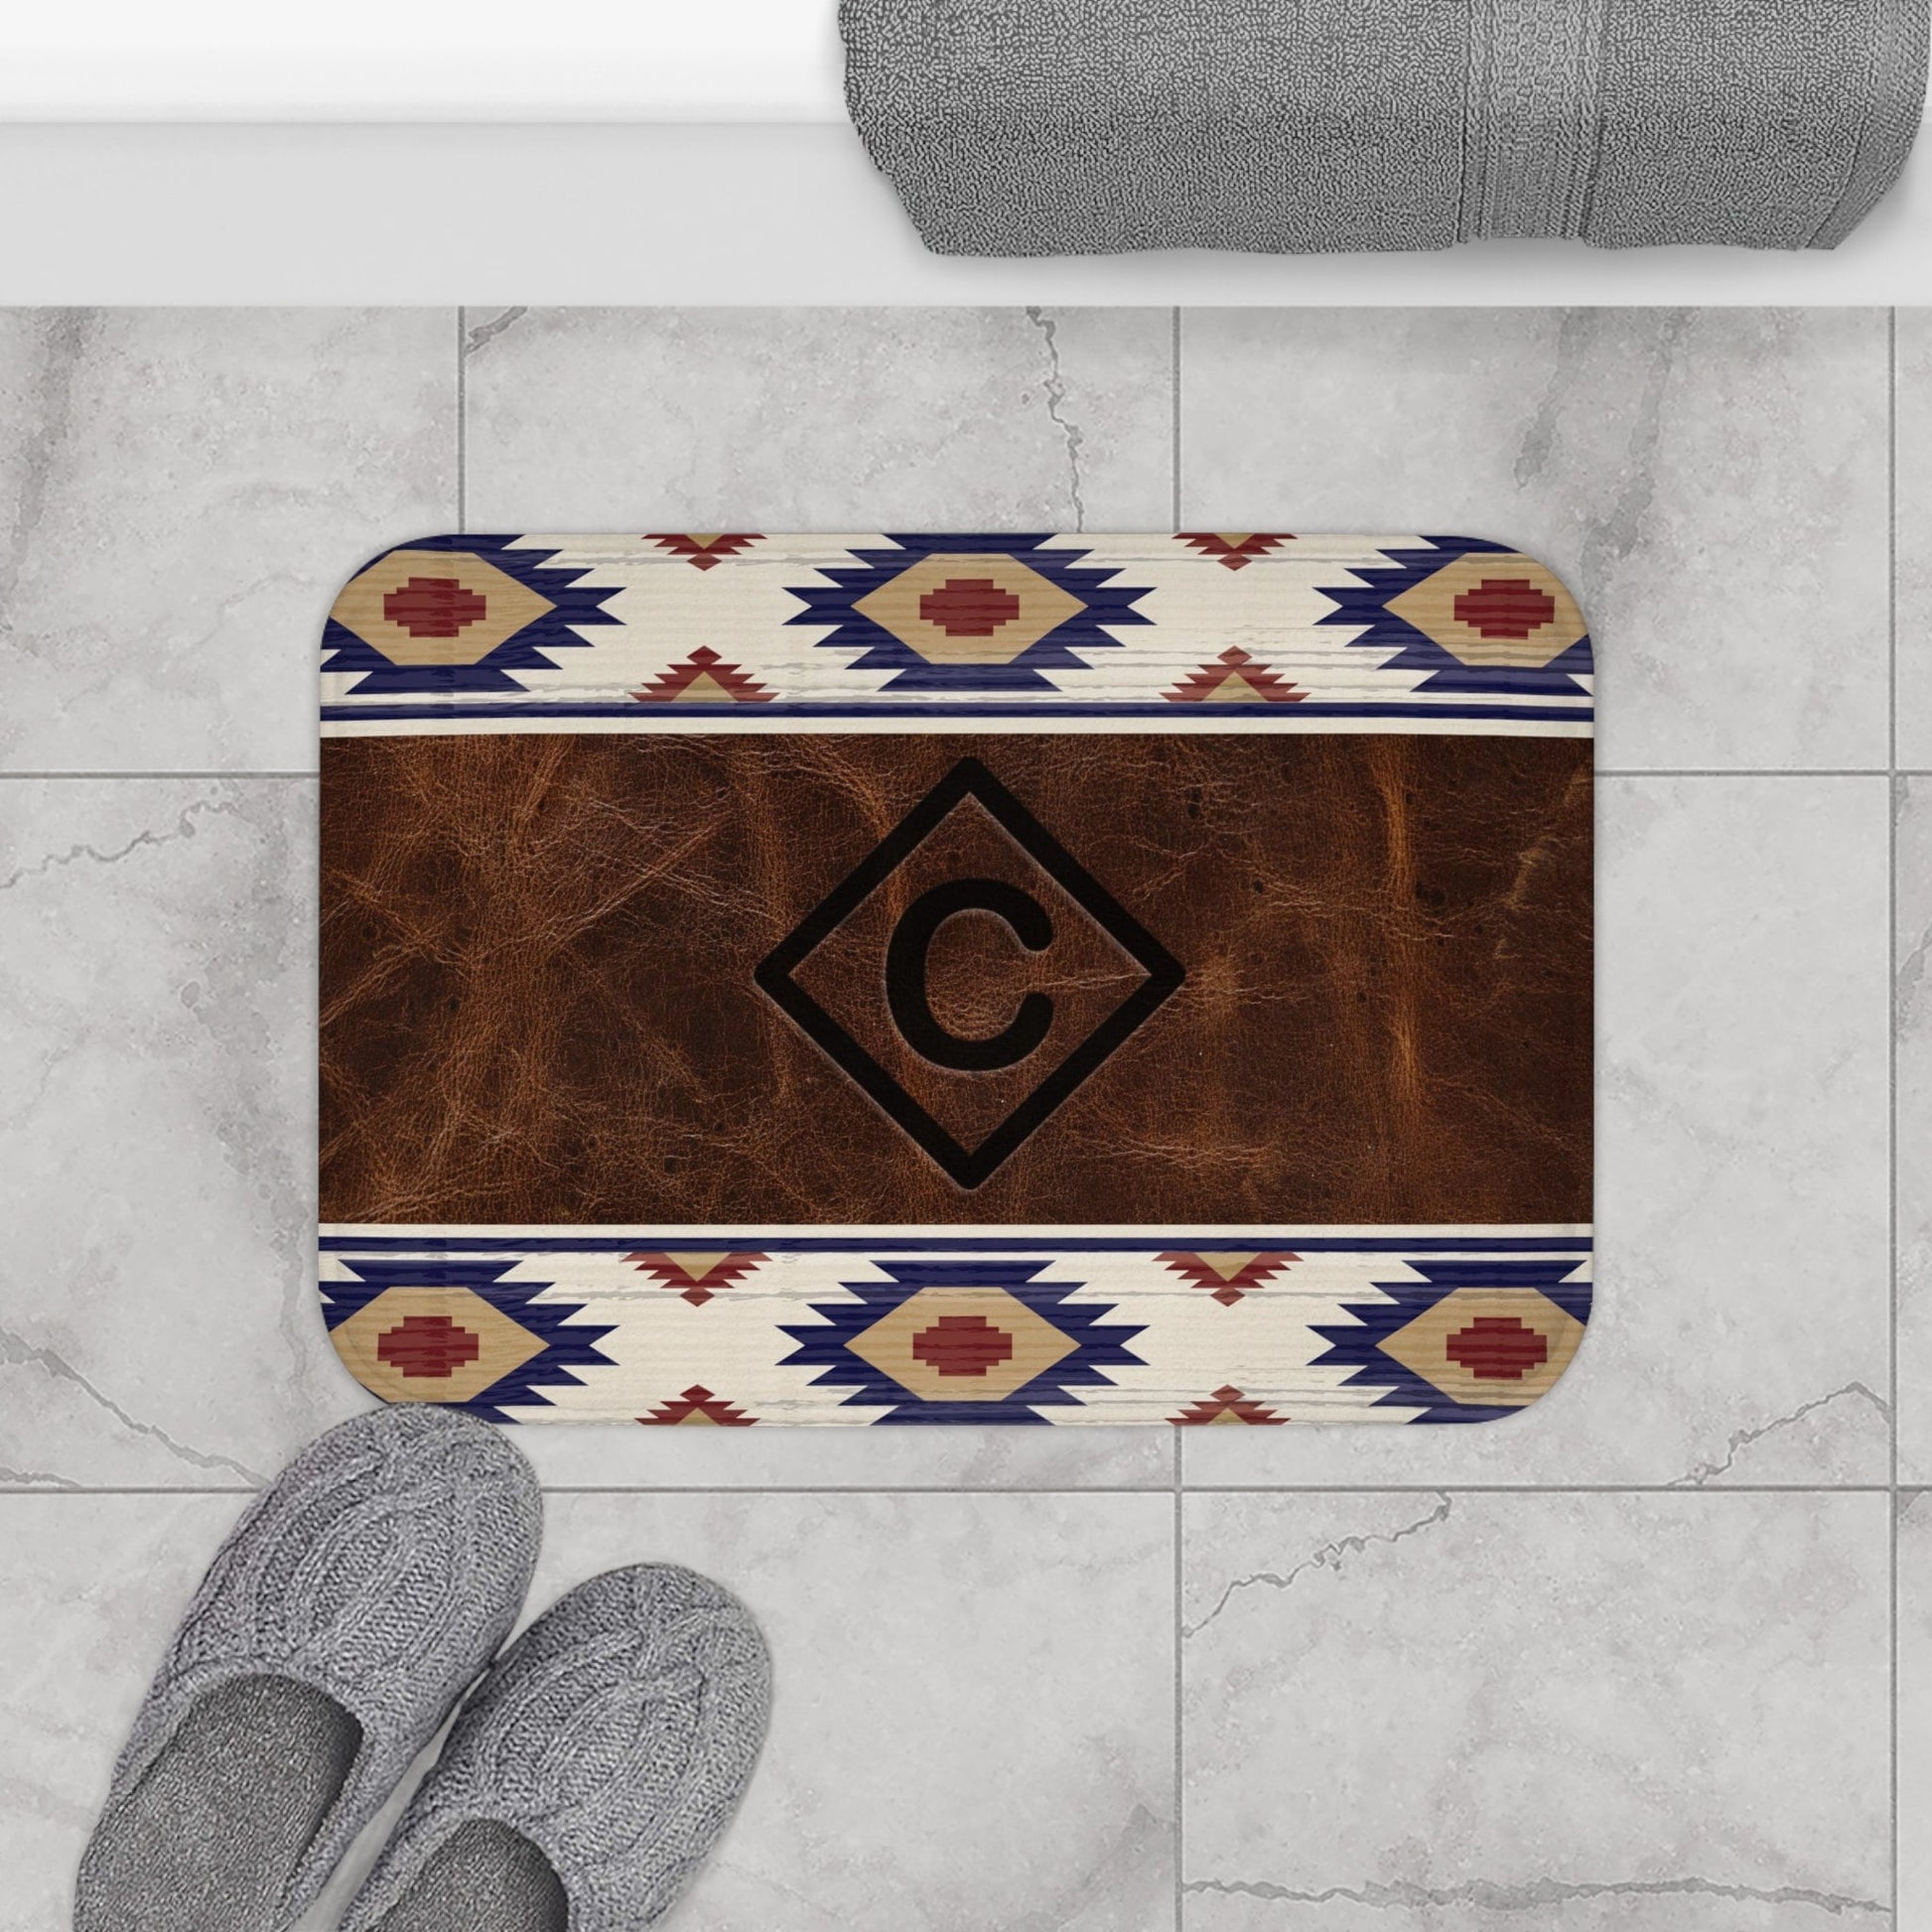 CUSTOM CATTLE BRAND Red White and Blue Aztec Leather Pattern Bath Mat Western Bathroom Home Decor For Ranch House Southwestern Decor